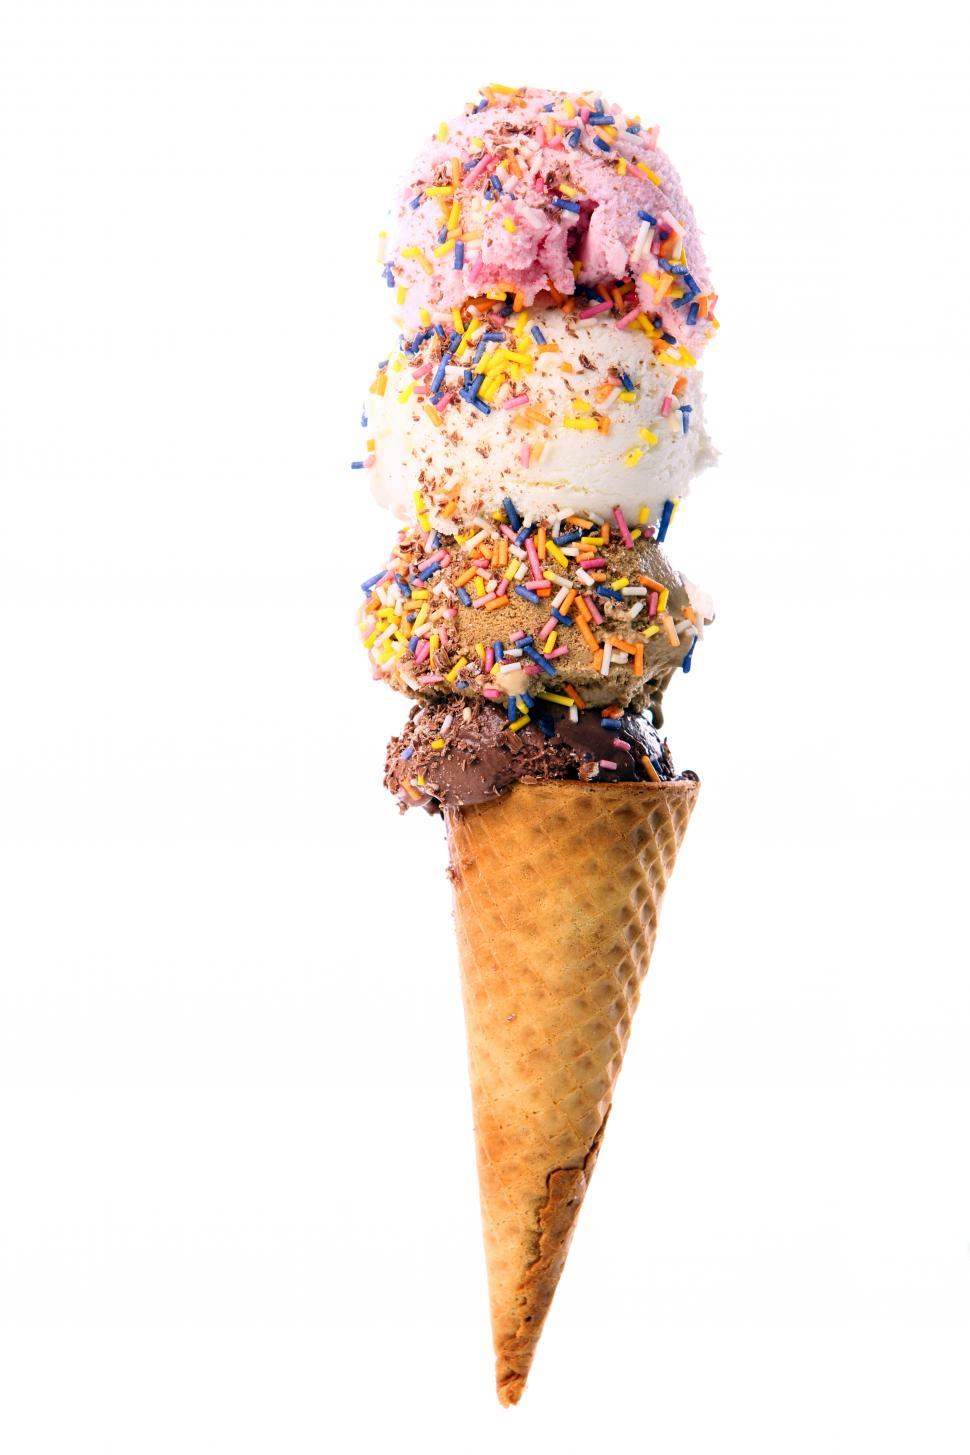 Download Free Stock Photo of Four scoops of ice cream with sprinkles 